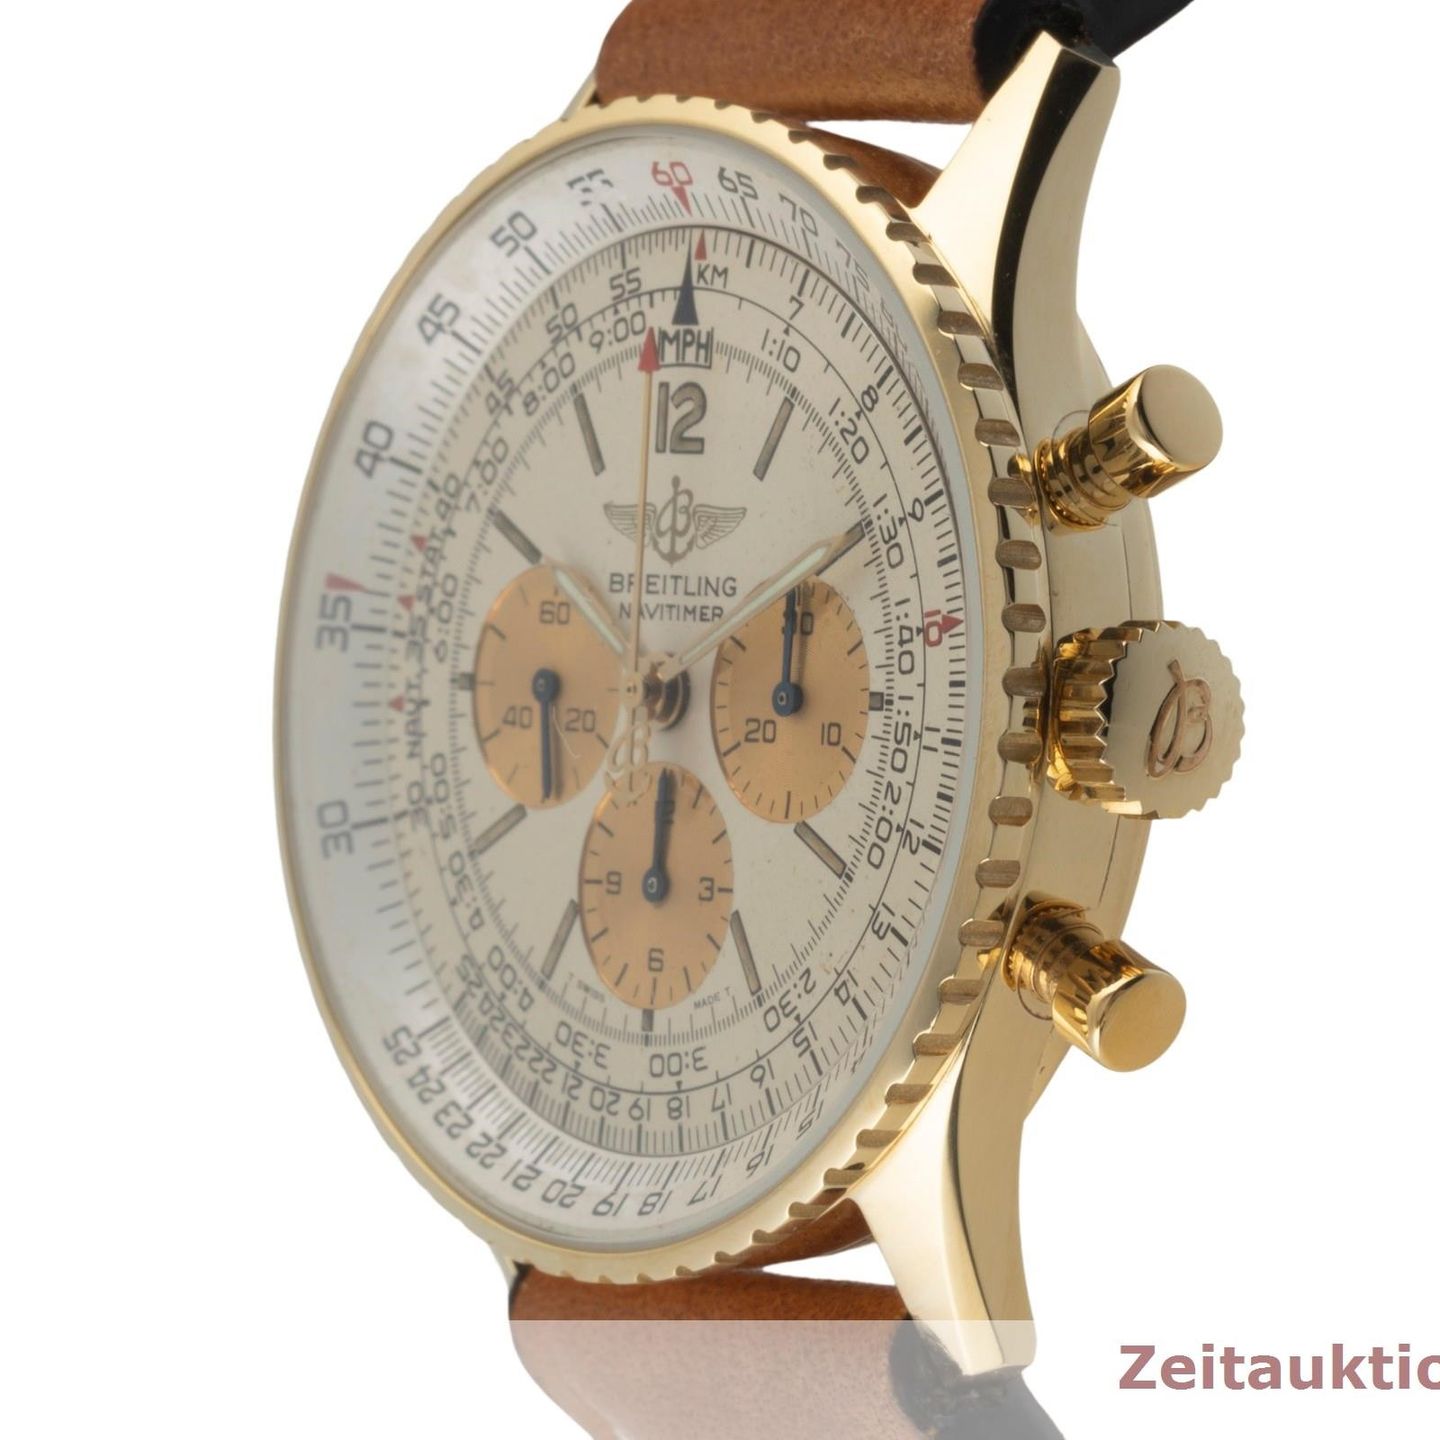 Breitling Navitimer Cosmonaute 81600 (1990) - Black dial 41 mm Yellow Gold case (6/8)